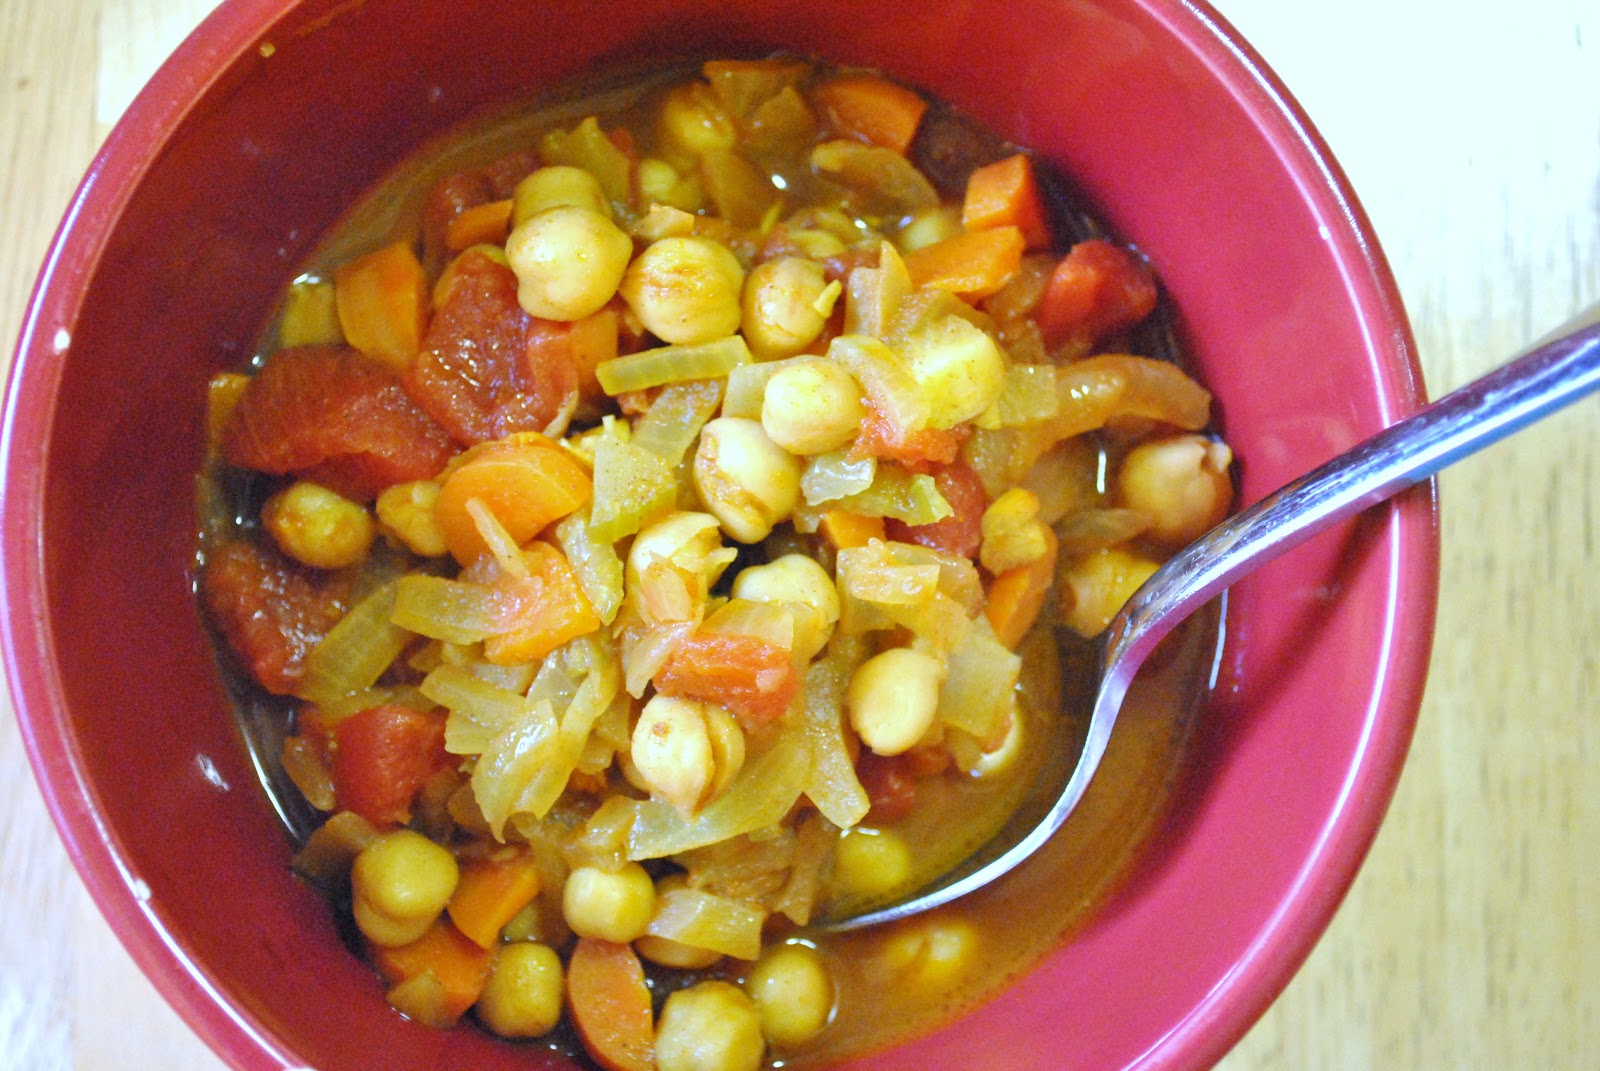 Kristin in Her Kitchen: Hearty Chickpea Soup